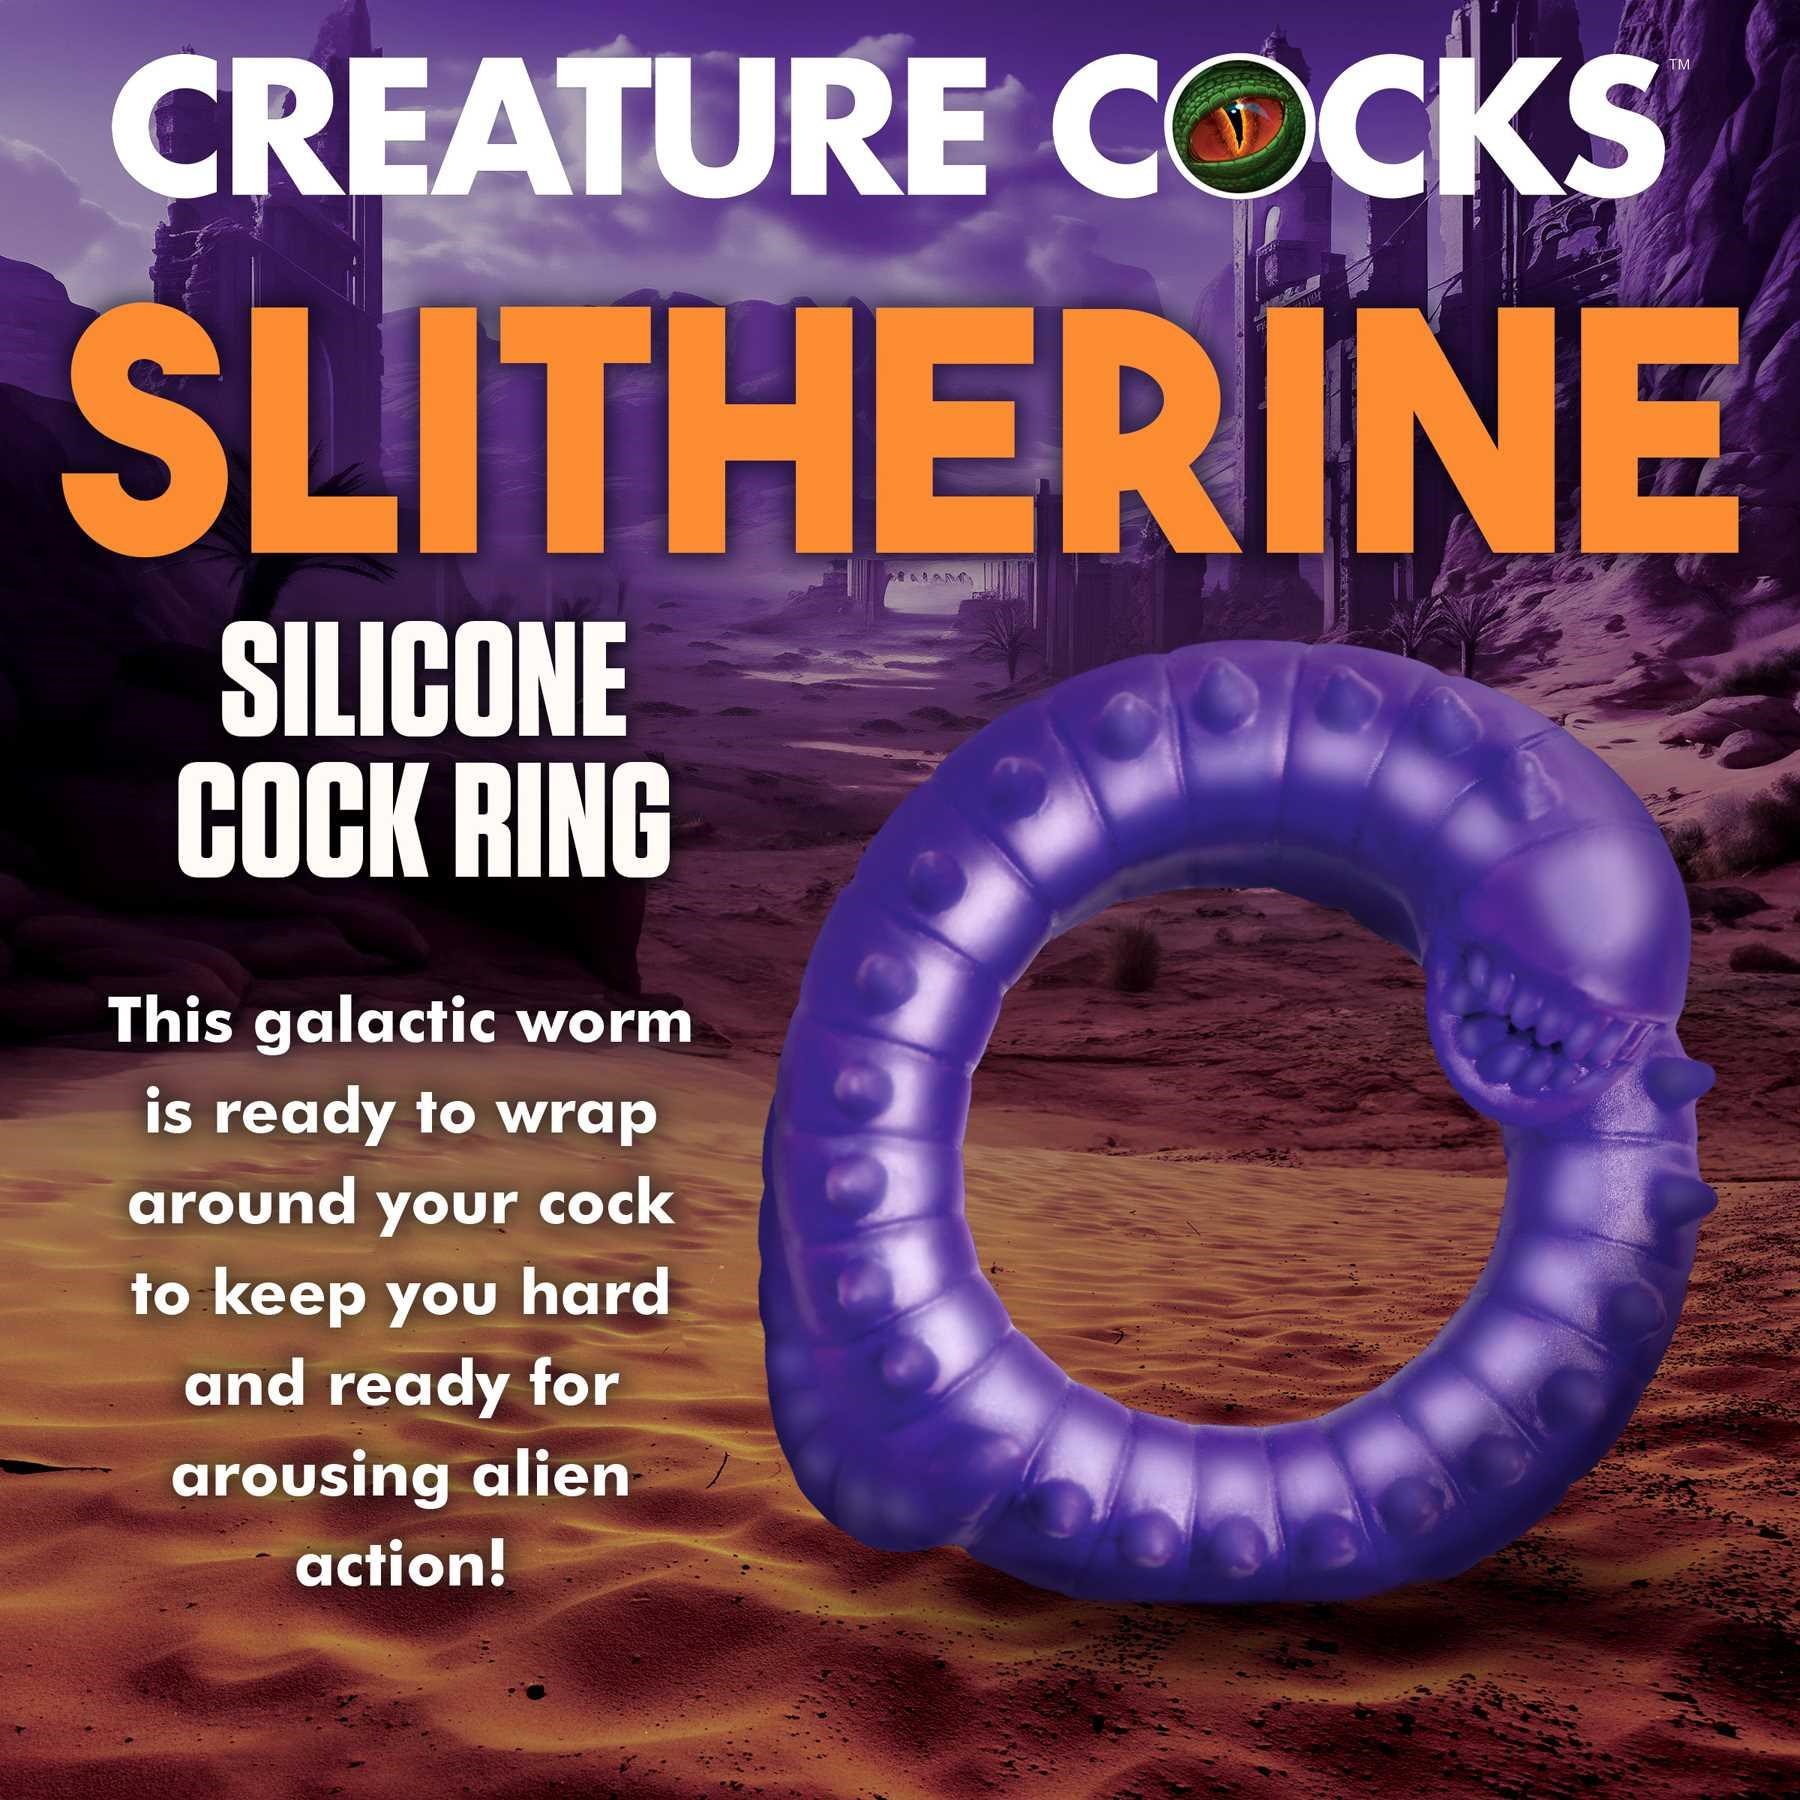 Creature Cocks Slitherine Silicone Cock Ring features call out sheet #3